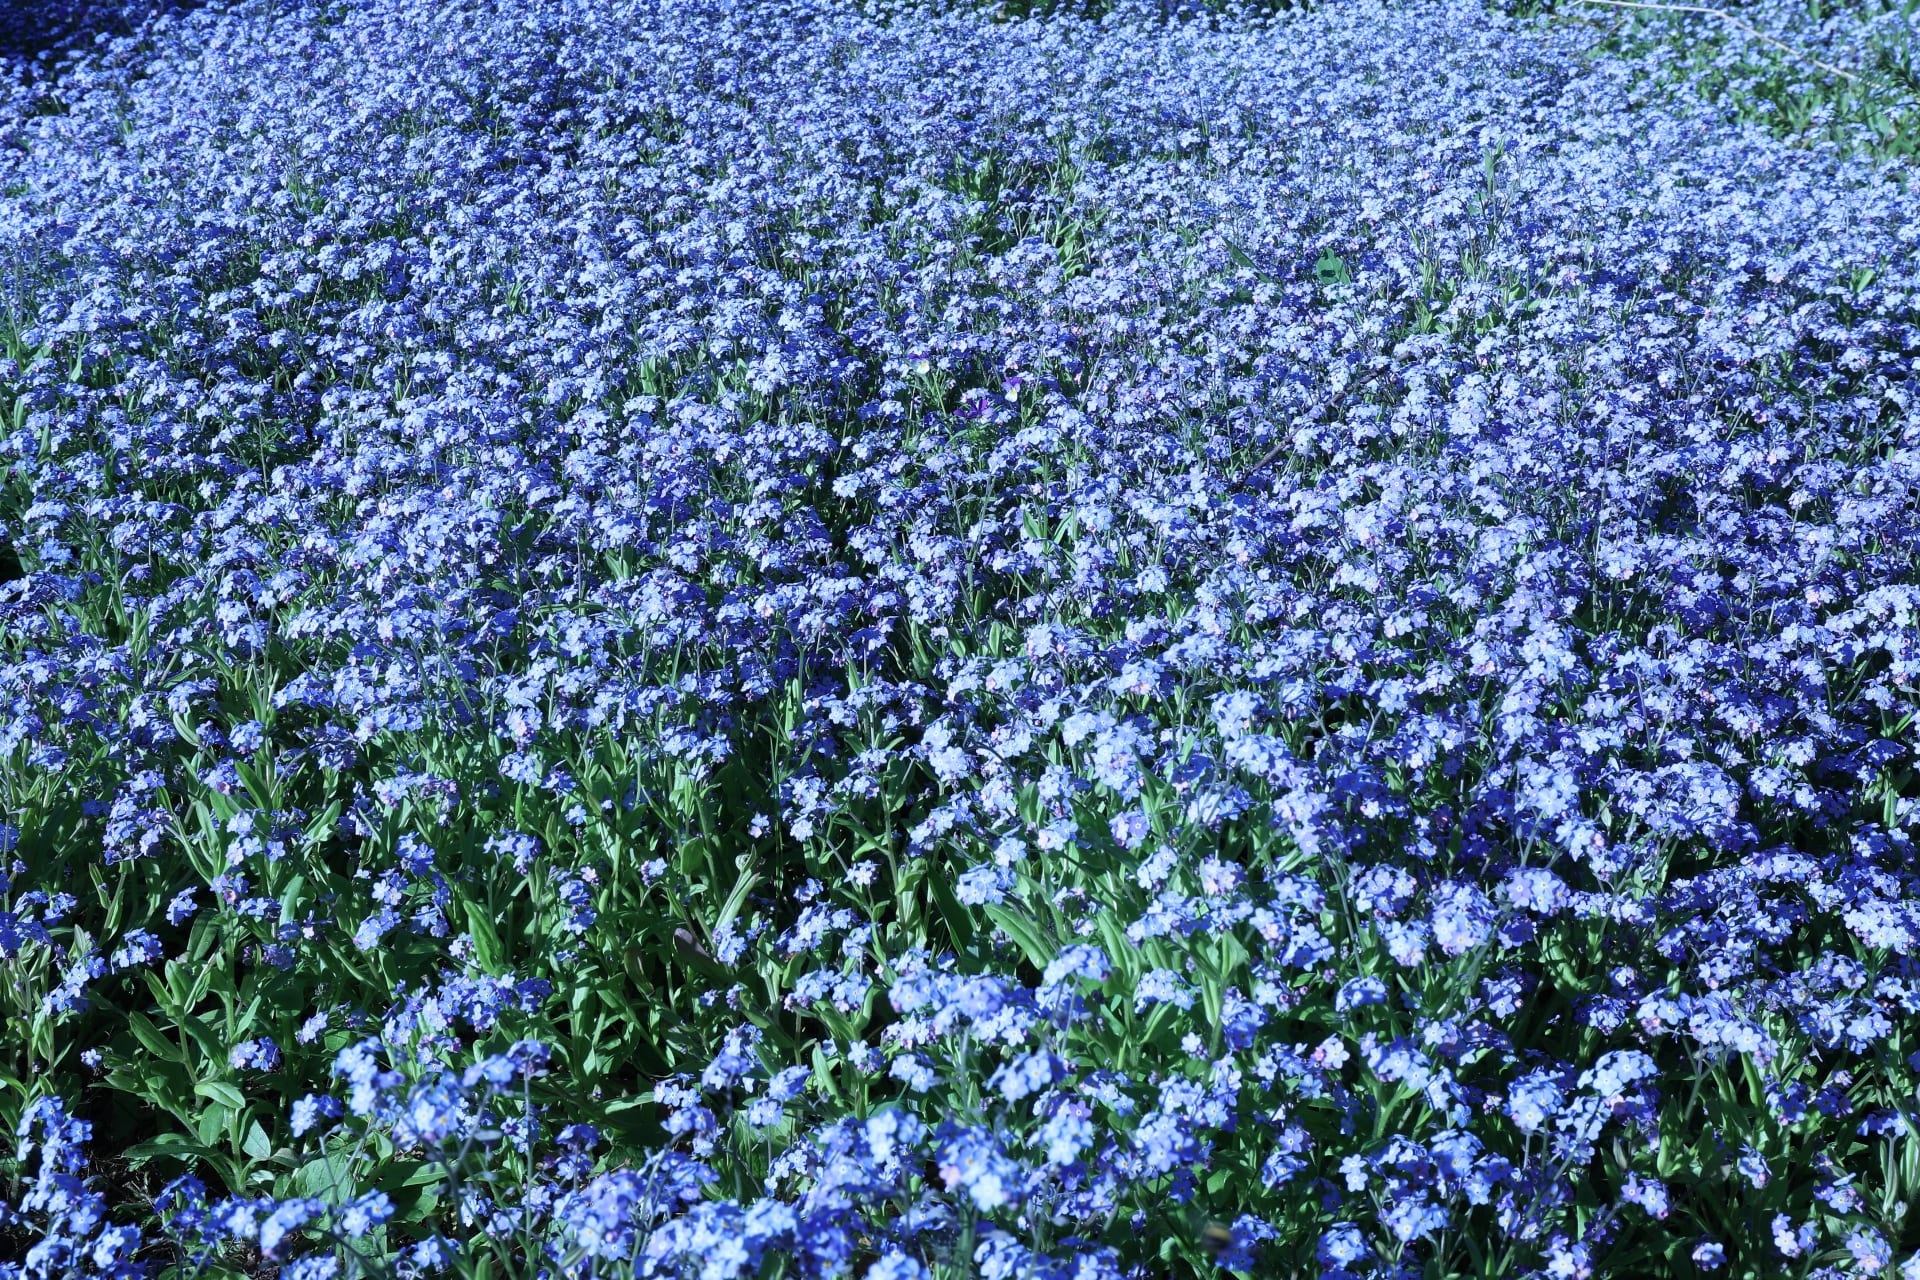 The delightful bright blue Forget-me-not spreads like a weed but is harmless at Arctic Garden.